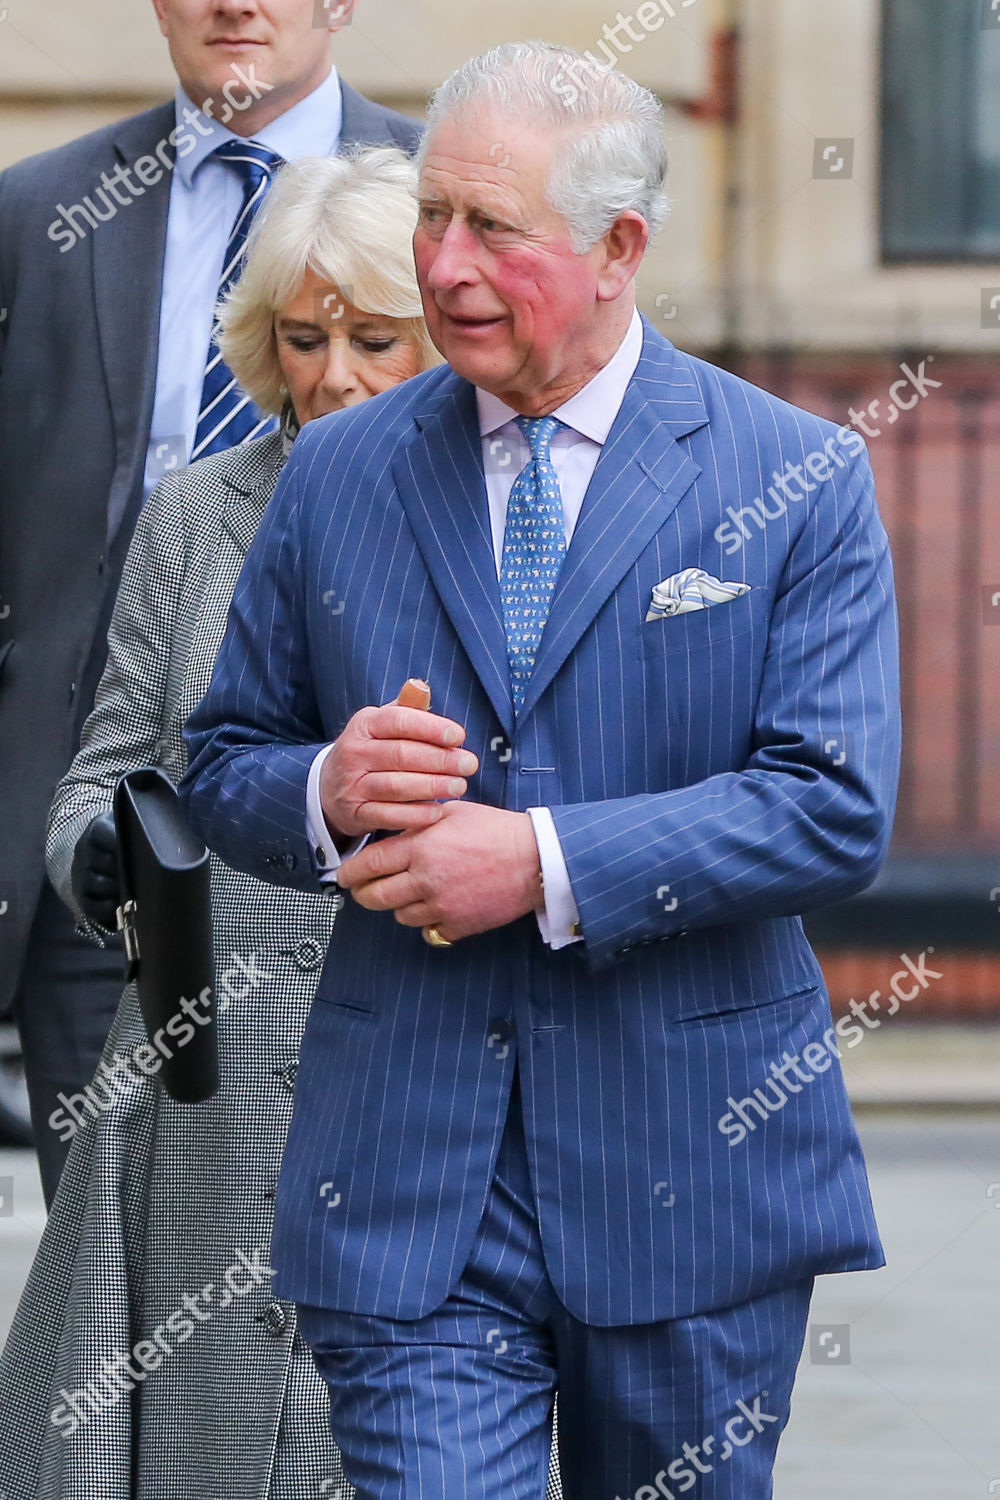 prince-charles-and-camilla-duchess-of-cornwall-visit-to-the-supreme-court-london-uk-shutterstock-editorial-10088523c.jpg